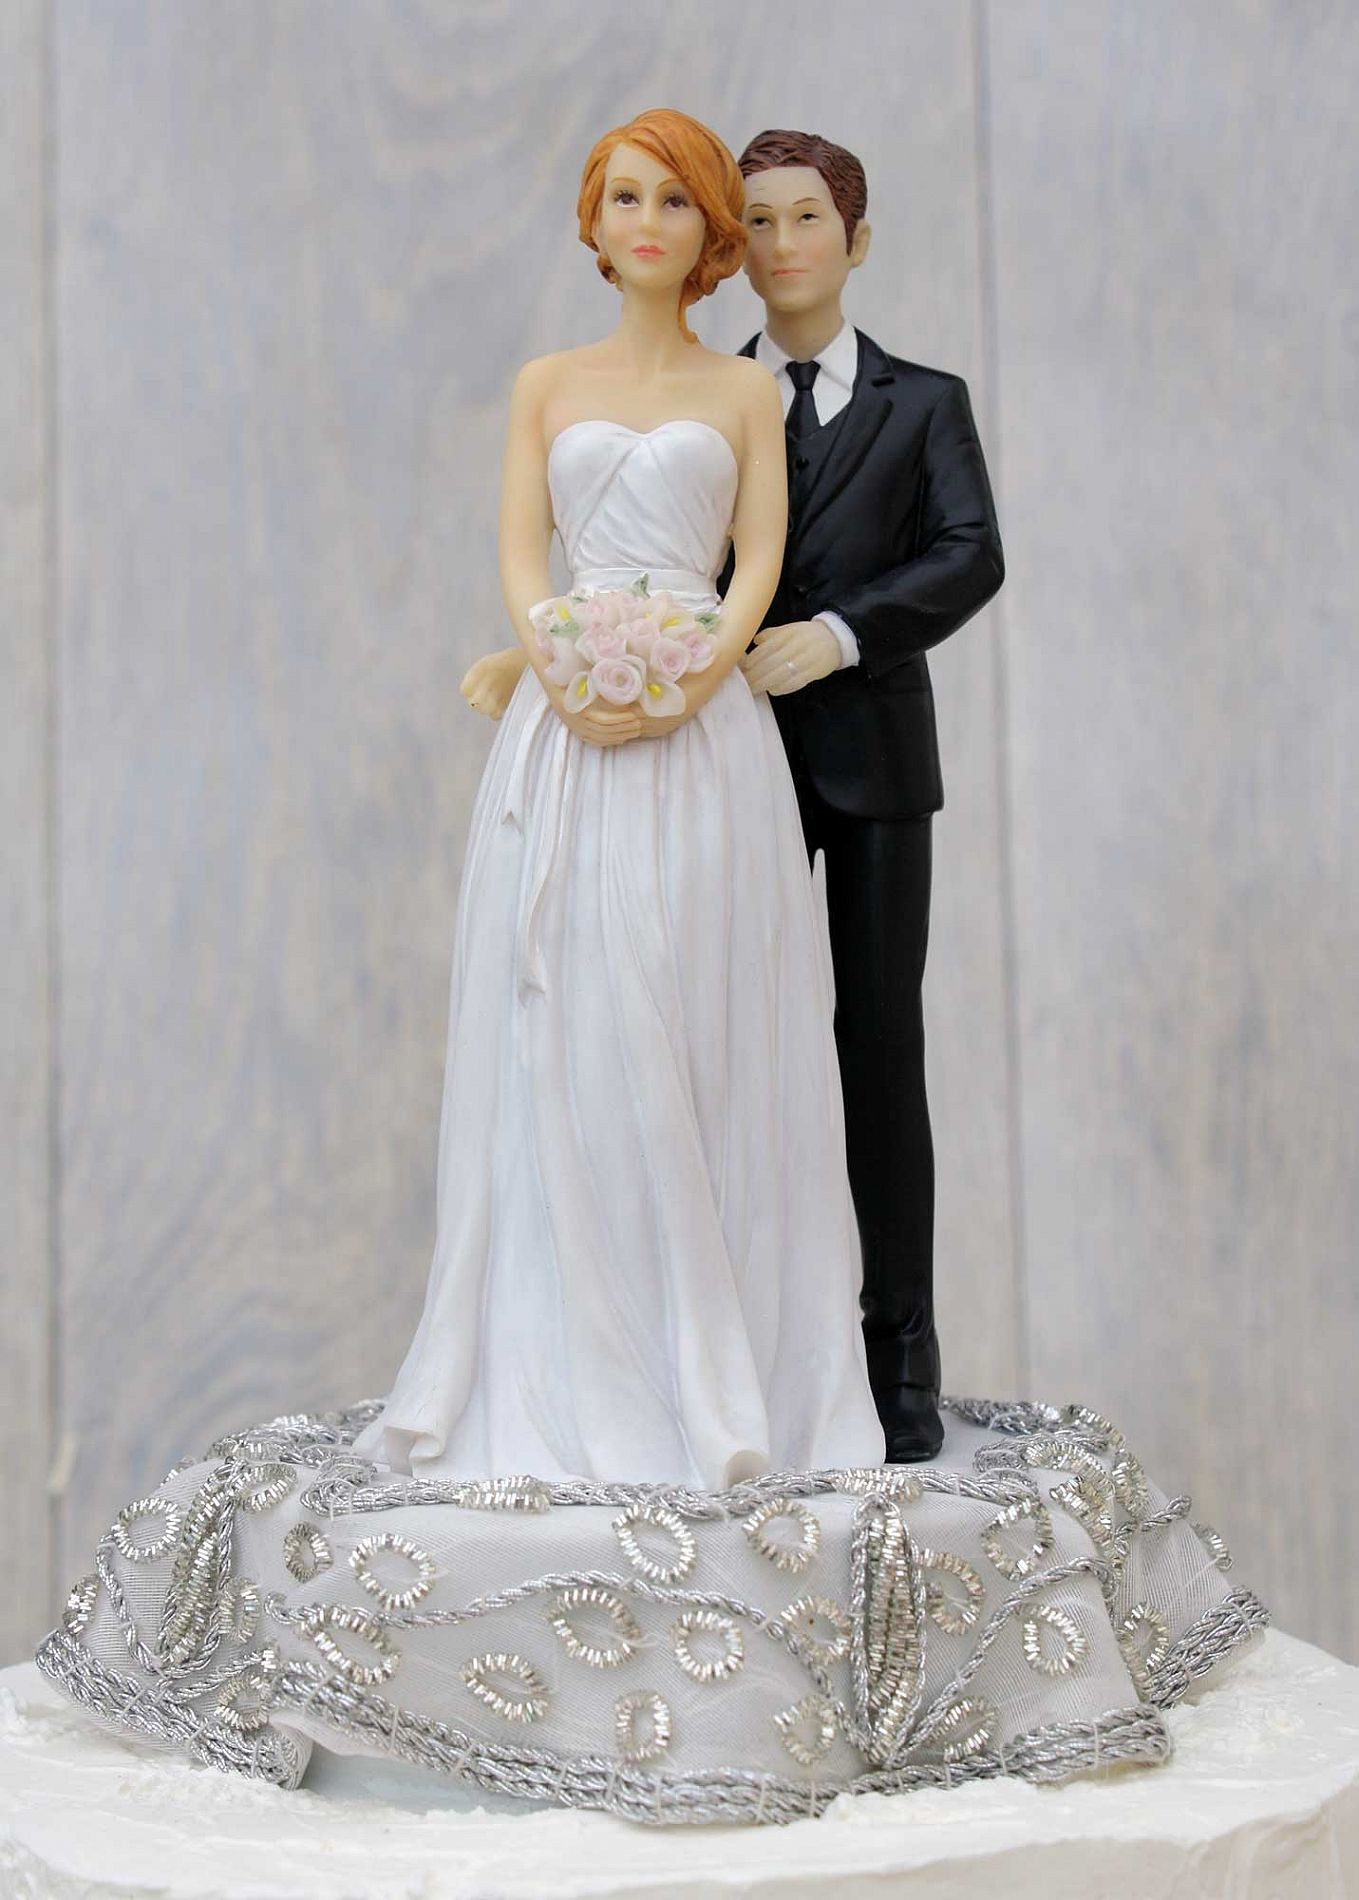 Traditional Wedding Cake Topper
 Traditional wedding cake toppers bride and groom idea in